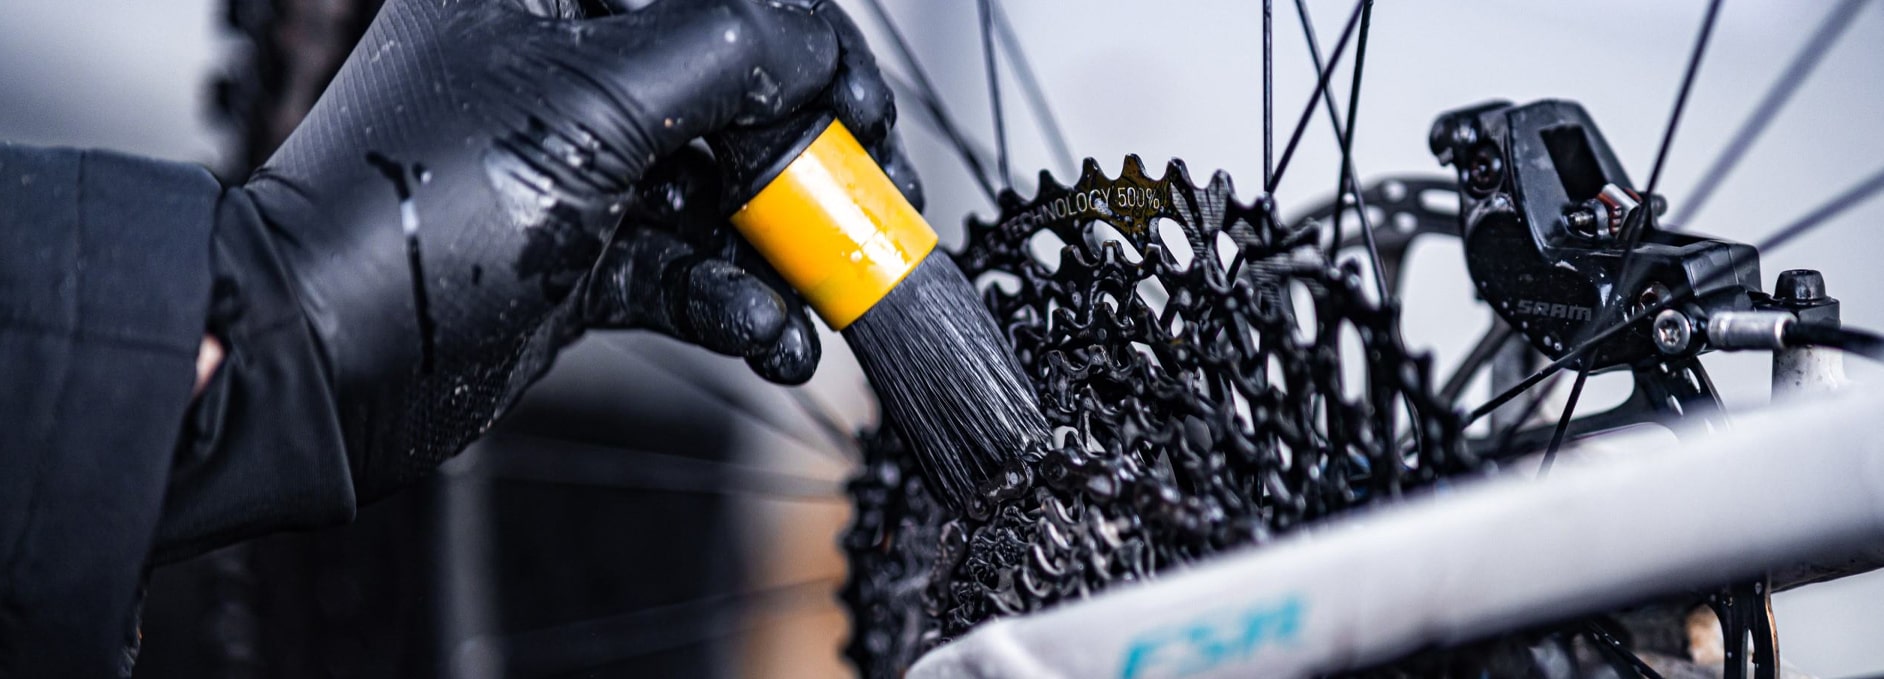 Looking after your Drivetrain